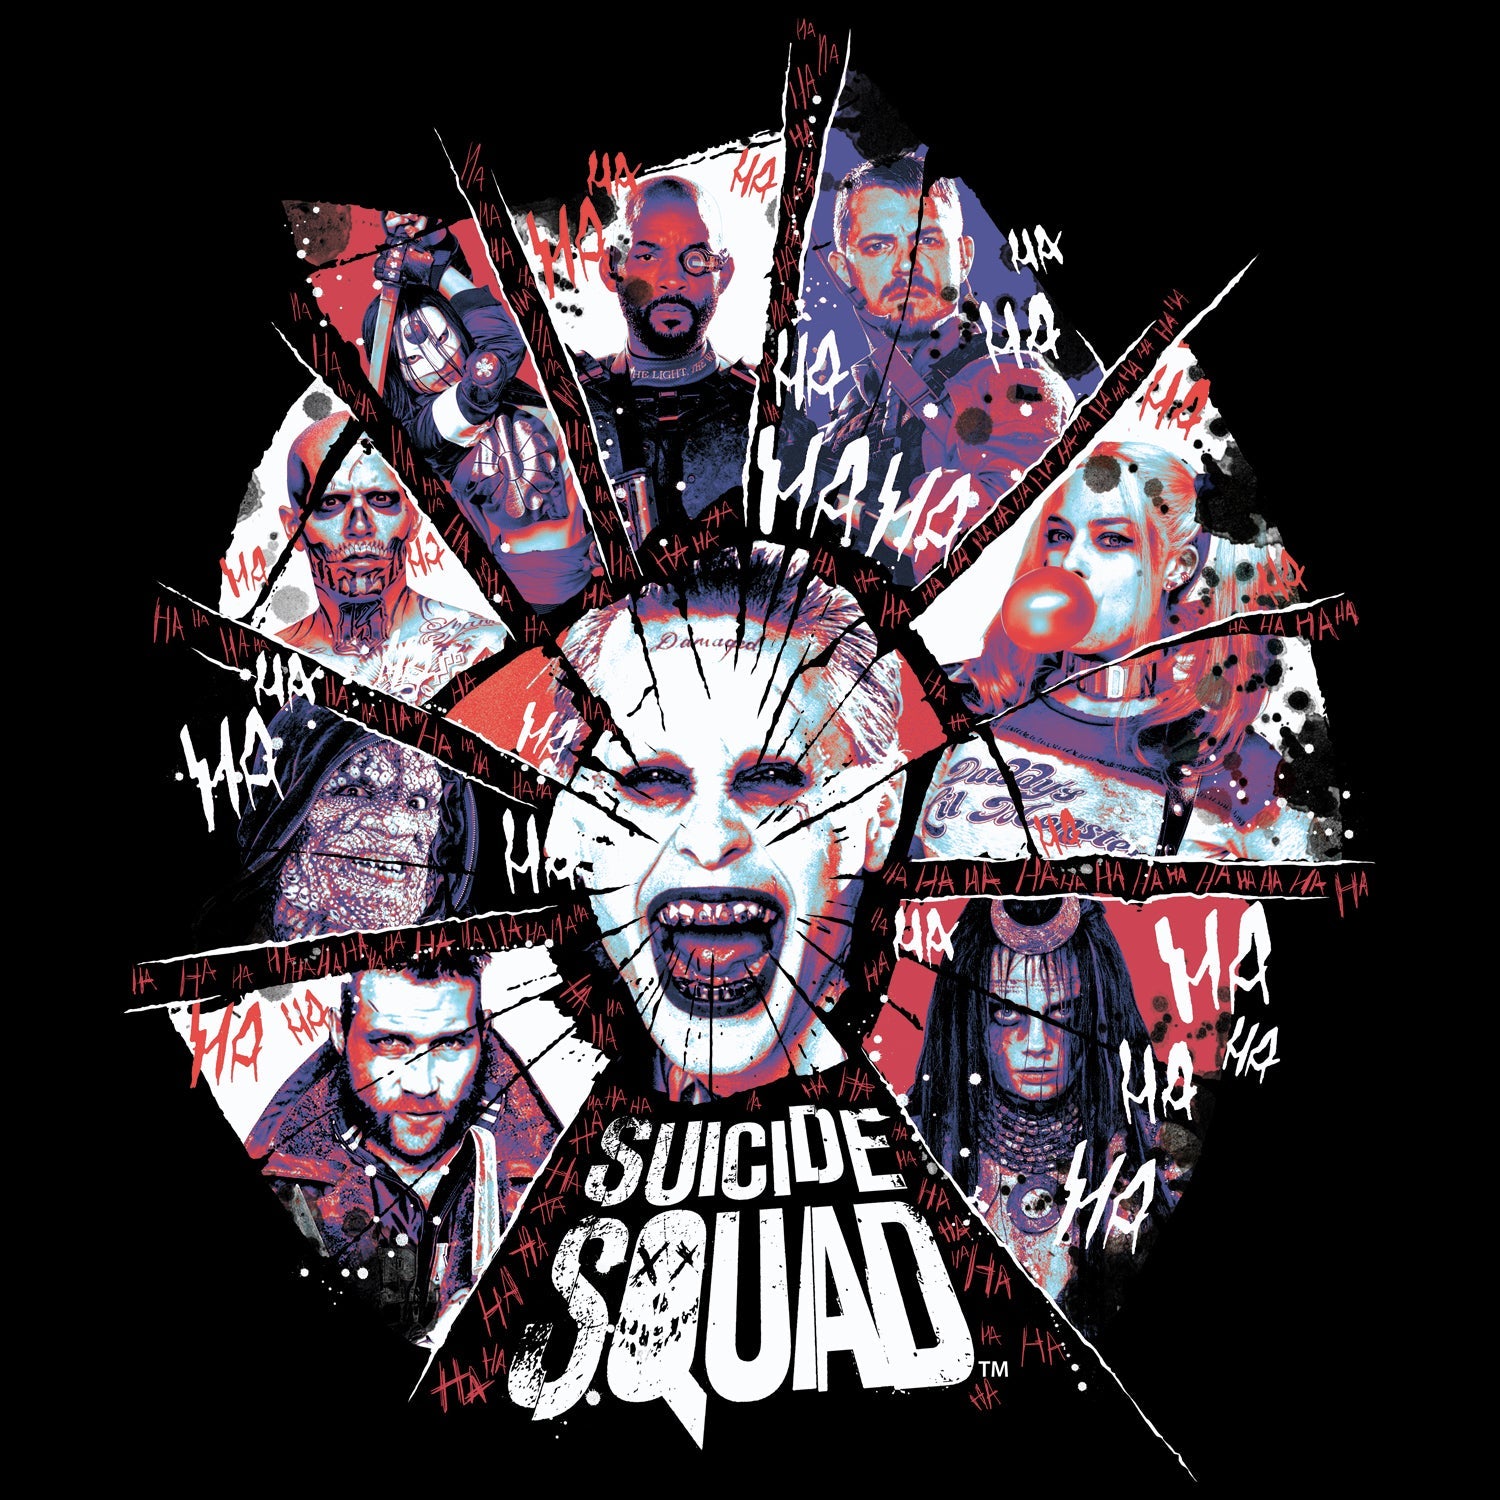 DC Suicide Squad Shattered Official Women's Long Tank Dress ()